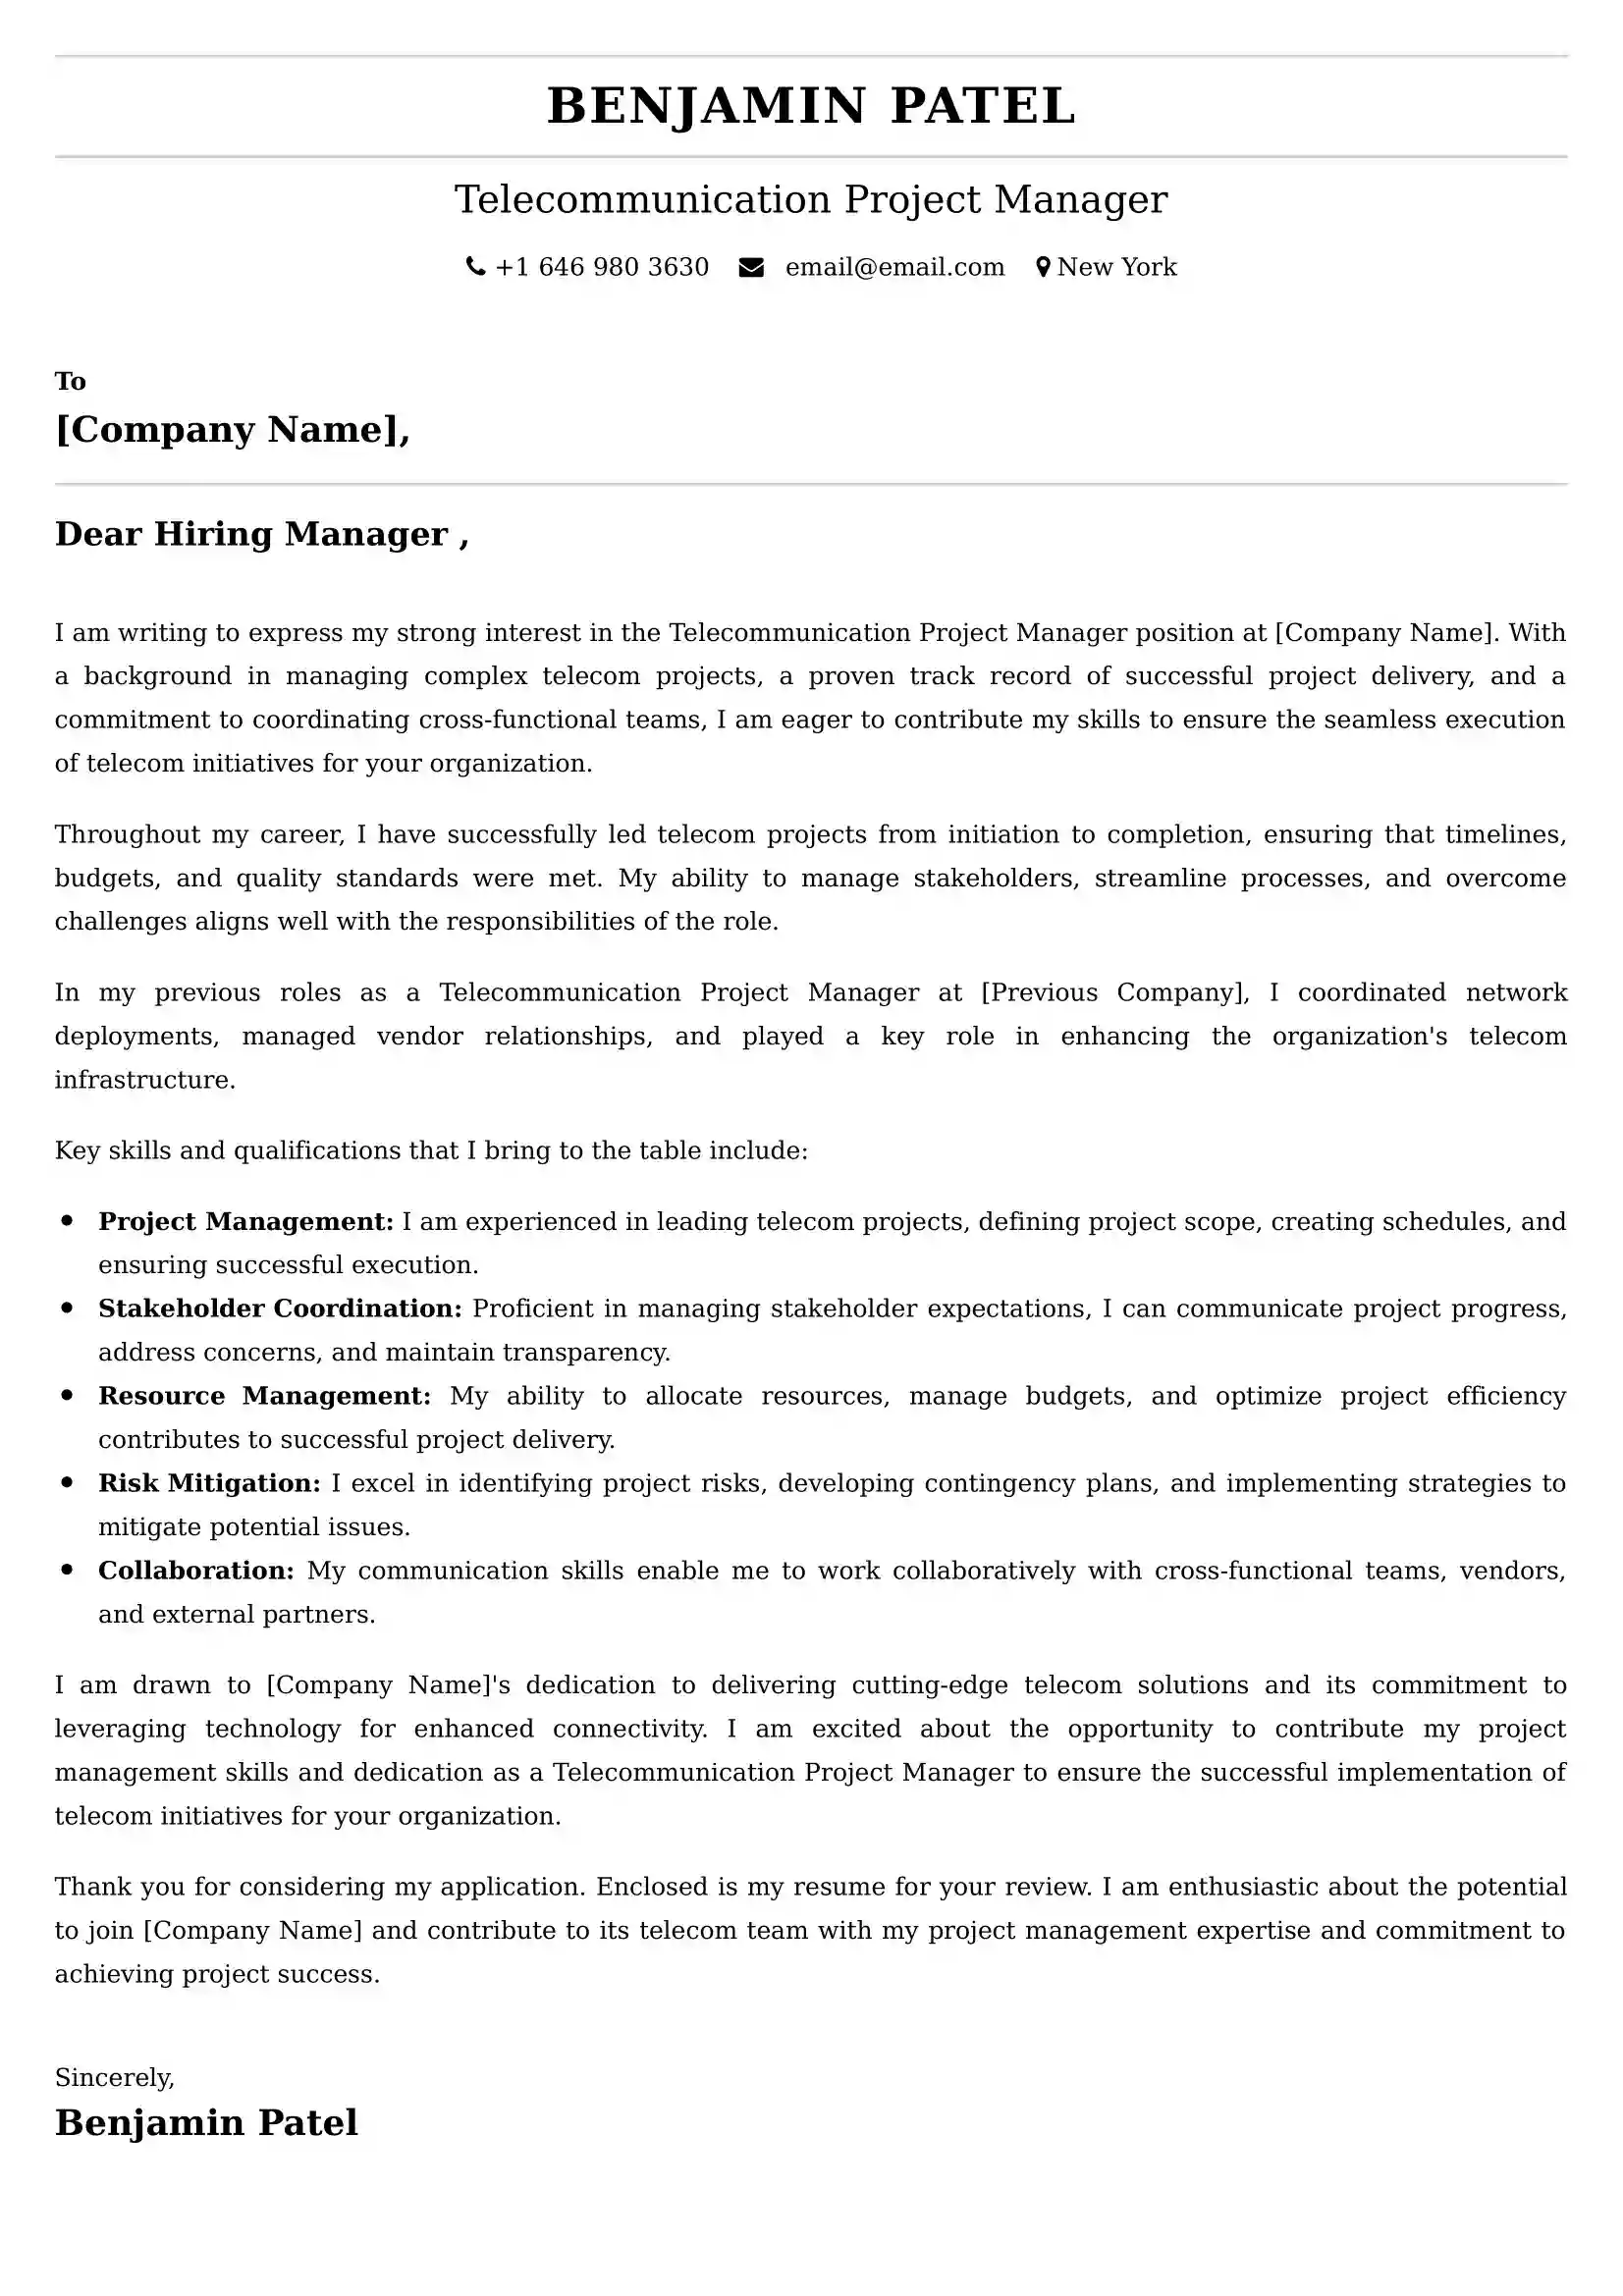 Telecommunication Project Manager Cover Letter Examples - Latest UK Format